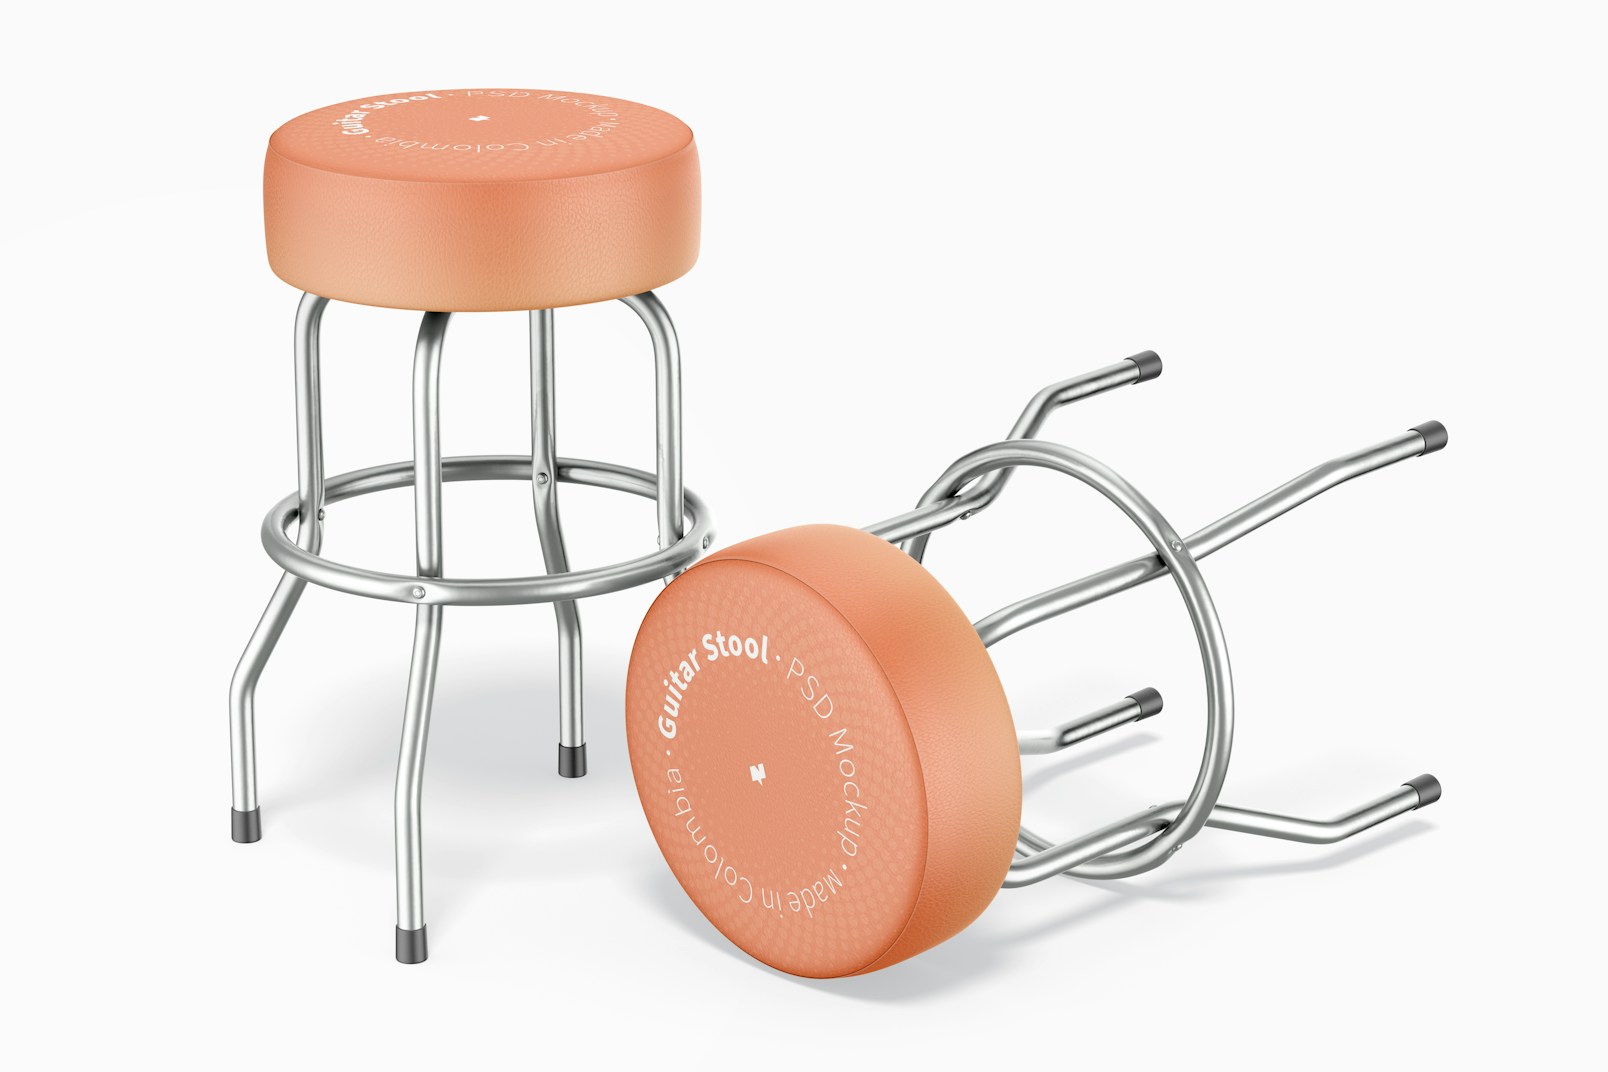 Guitar Stools Mockup, Standing and Dropped